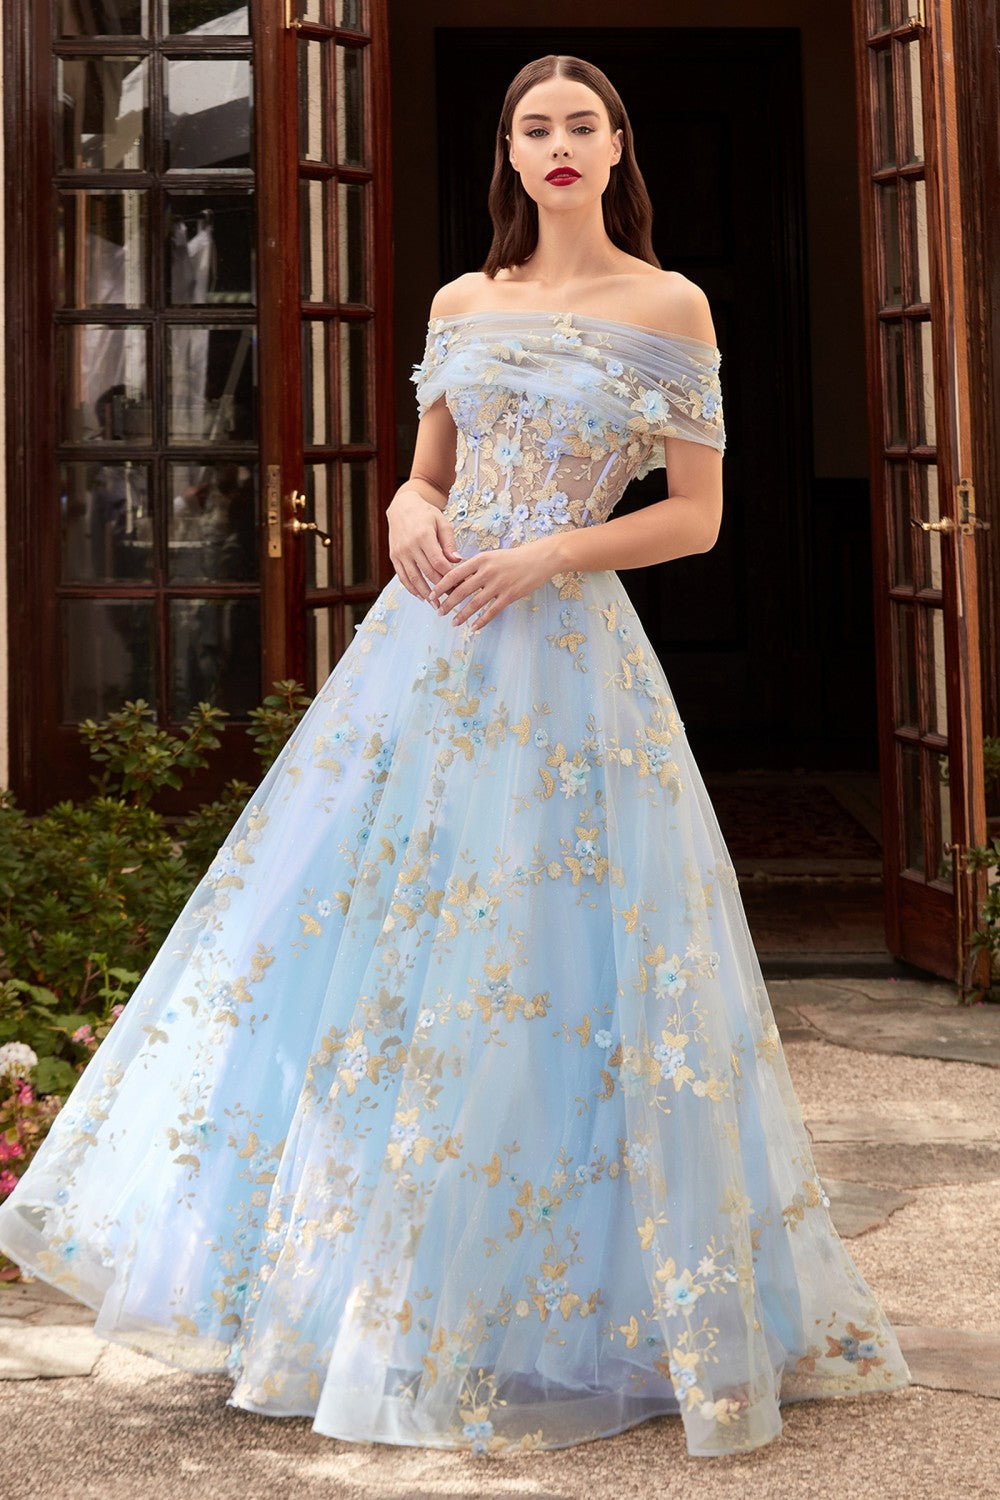 Princess Square Neck Short Sleeve Prom Dress Sequins Ball Gowns Baby Blue  Evening Tulle Dress With Train Open Back Wedding Dress - AliExpress